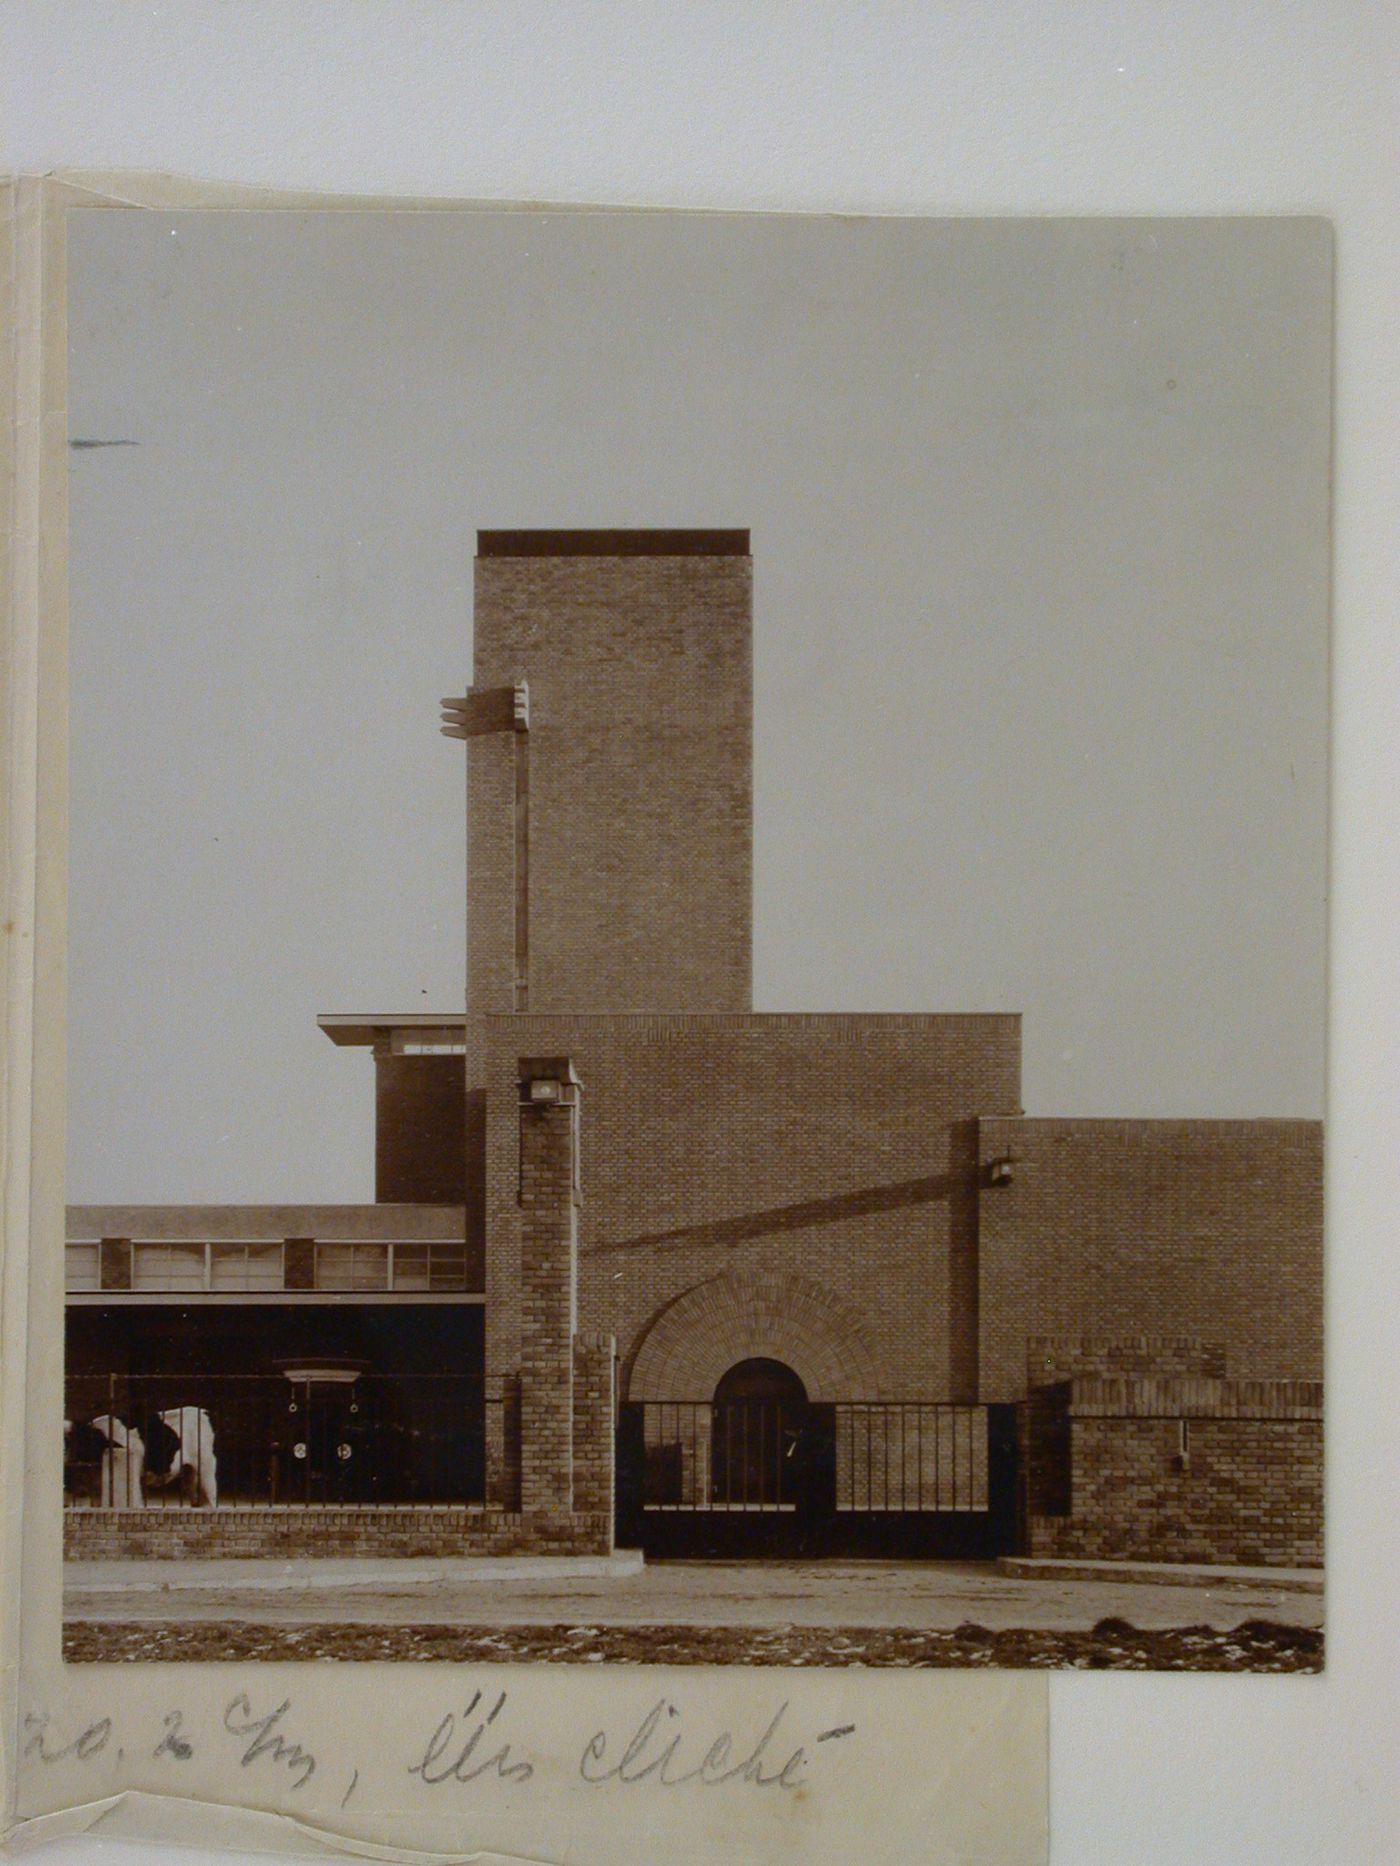 Partial view of public slaughterhouse (now demolished) with livestock, Hilversum, Netherlands